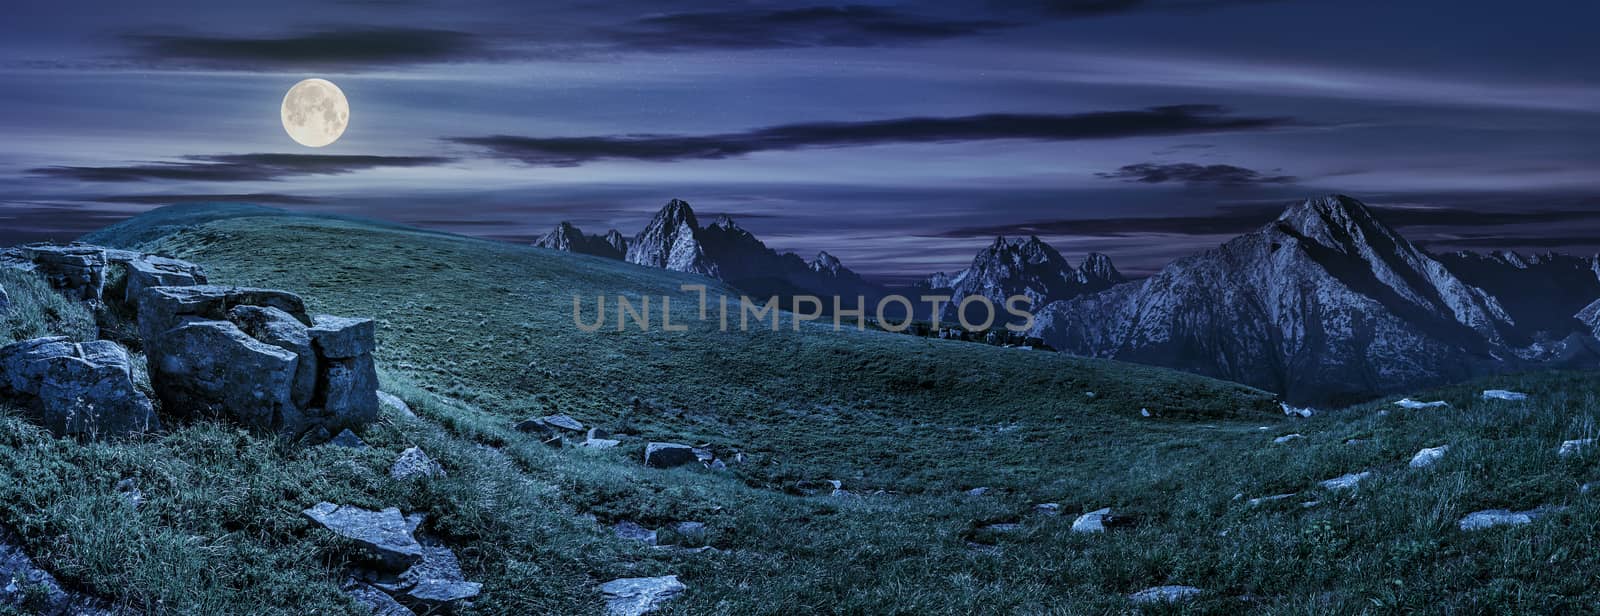 huge stones in valley on top of mountain range at night by Pellinni